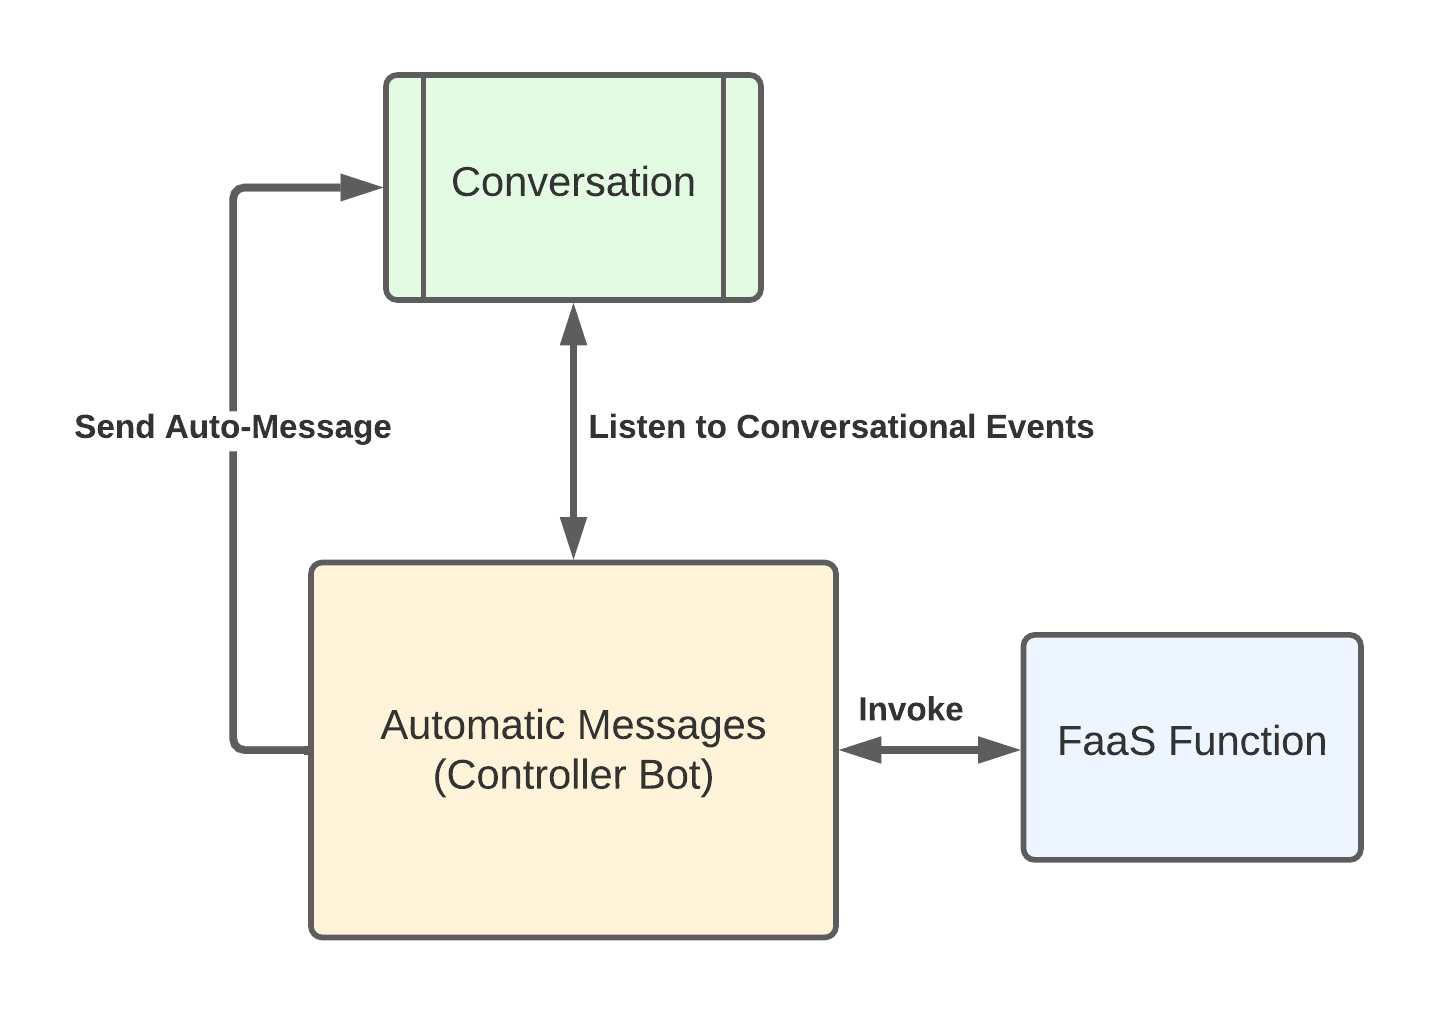 Functions: Automatic Messages Flow